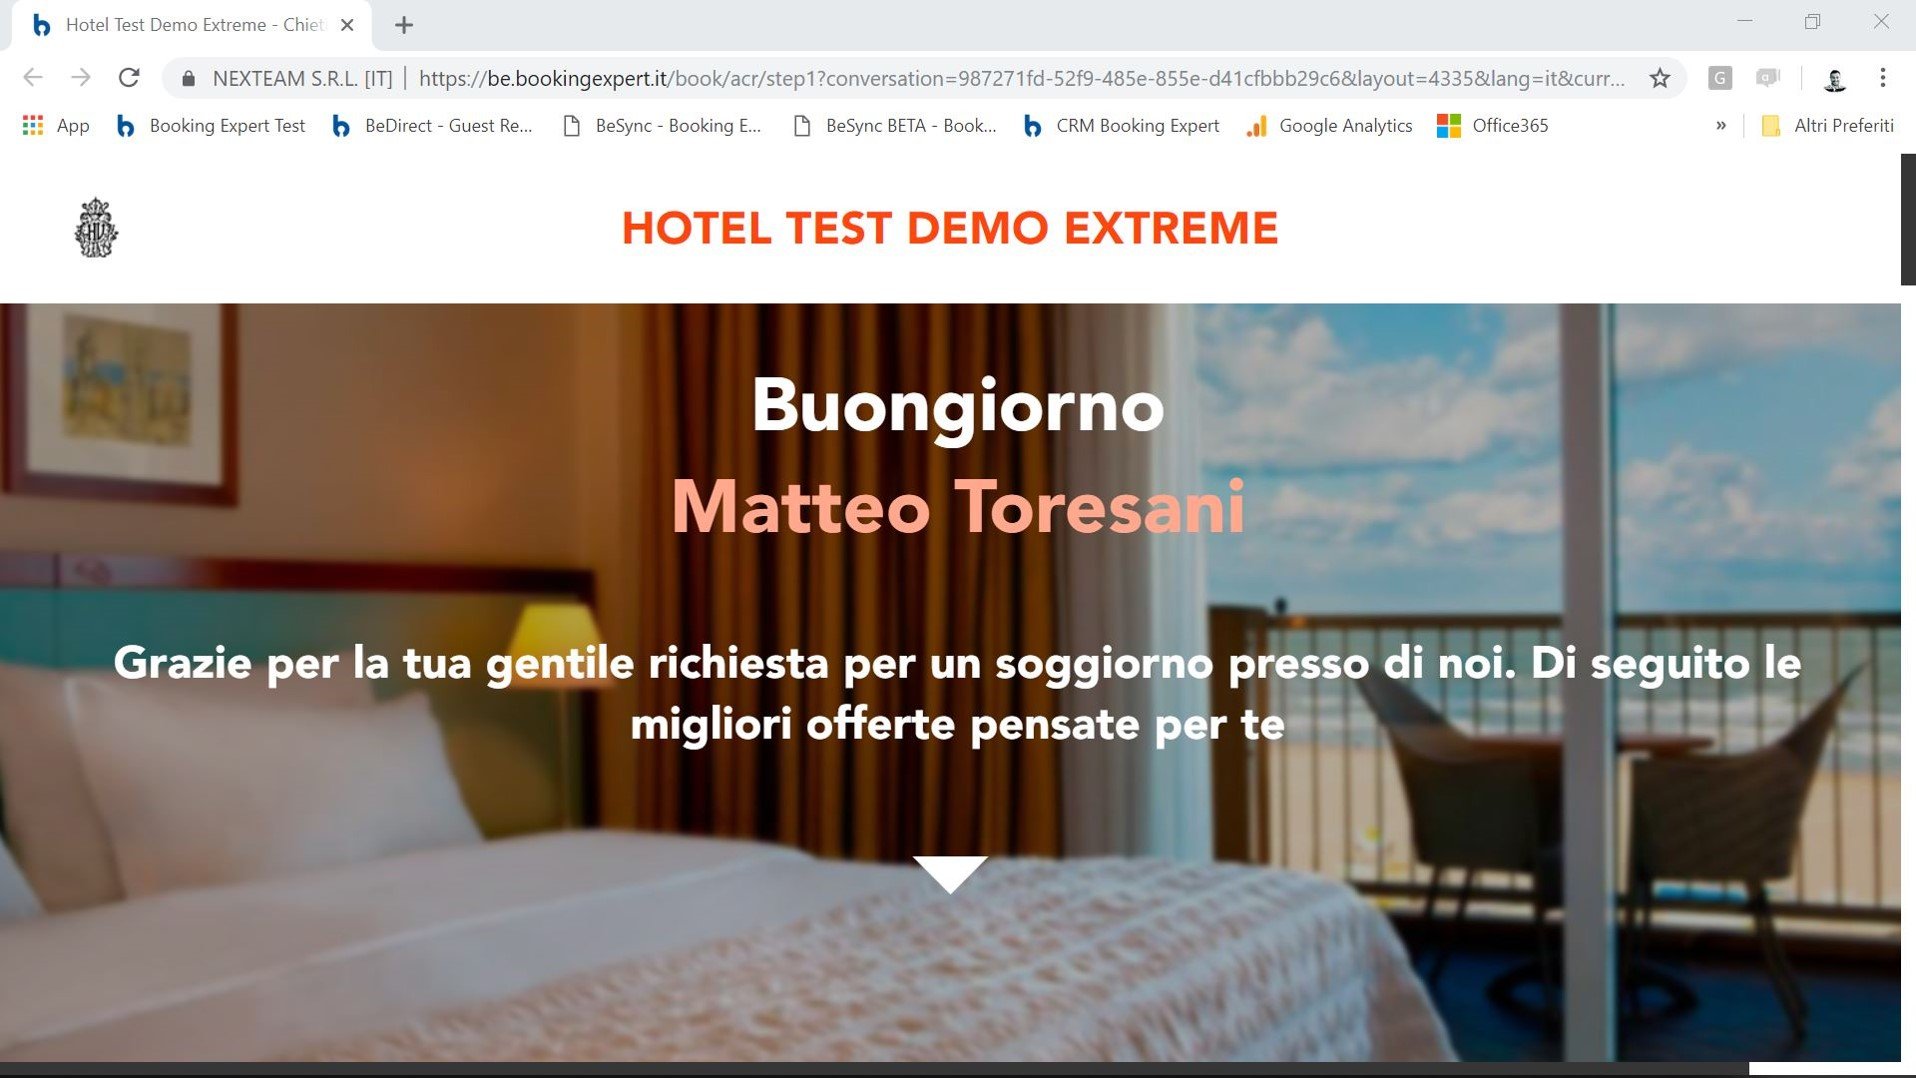 BeDirect Guest Reservation Manager